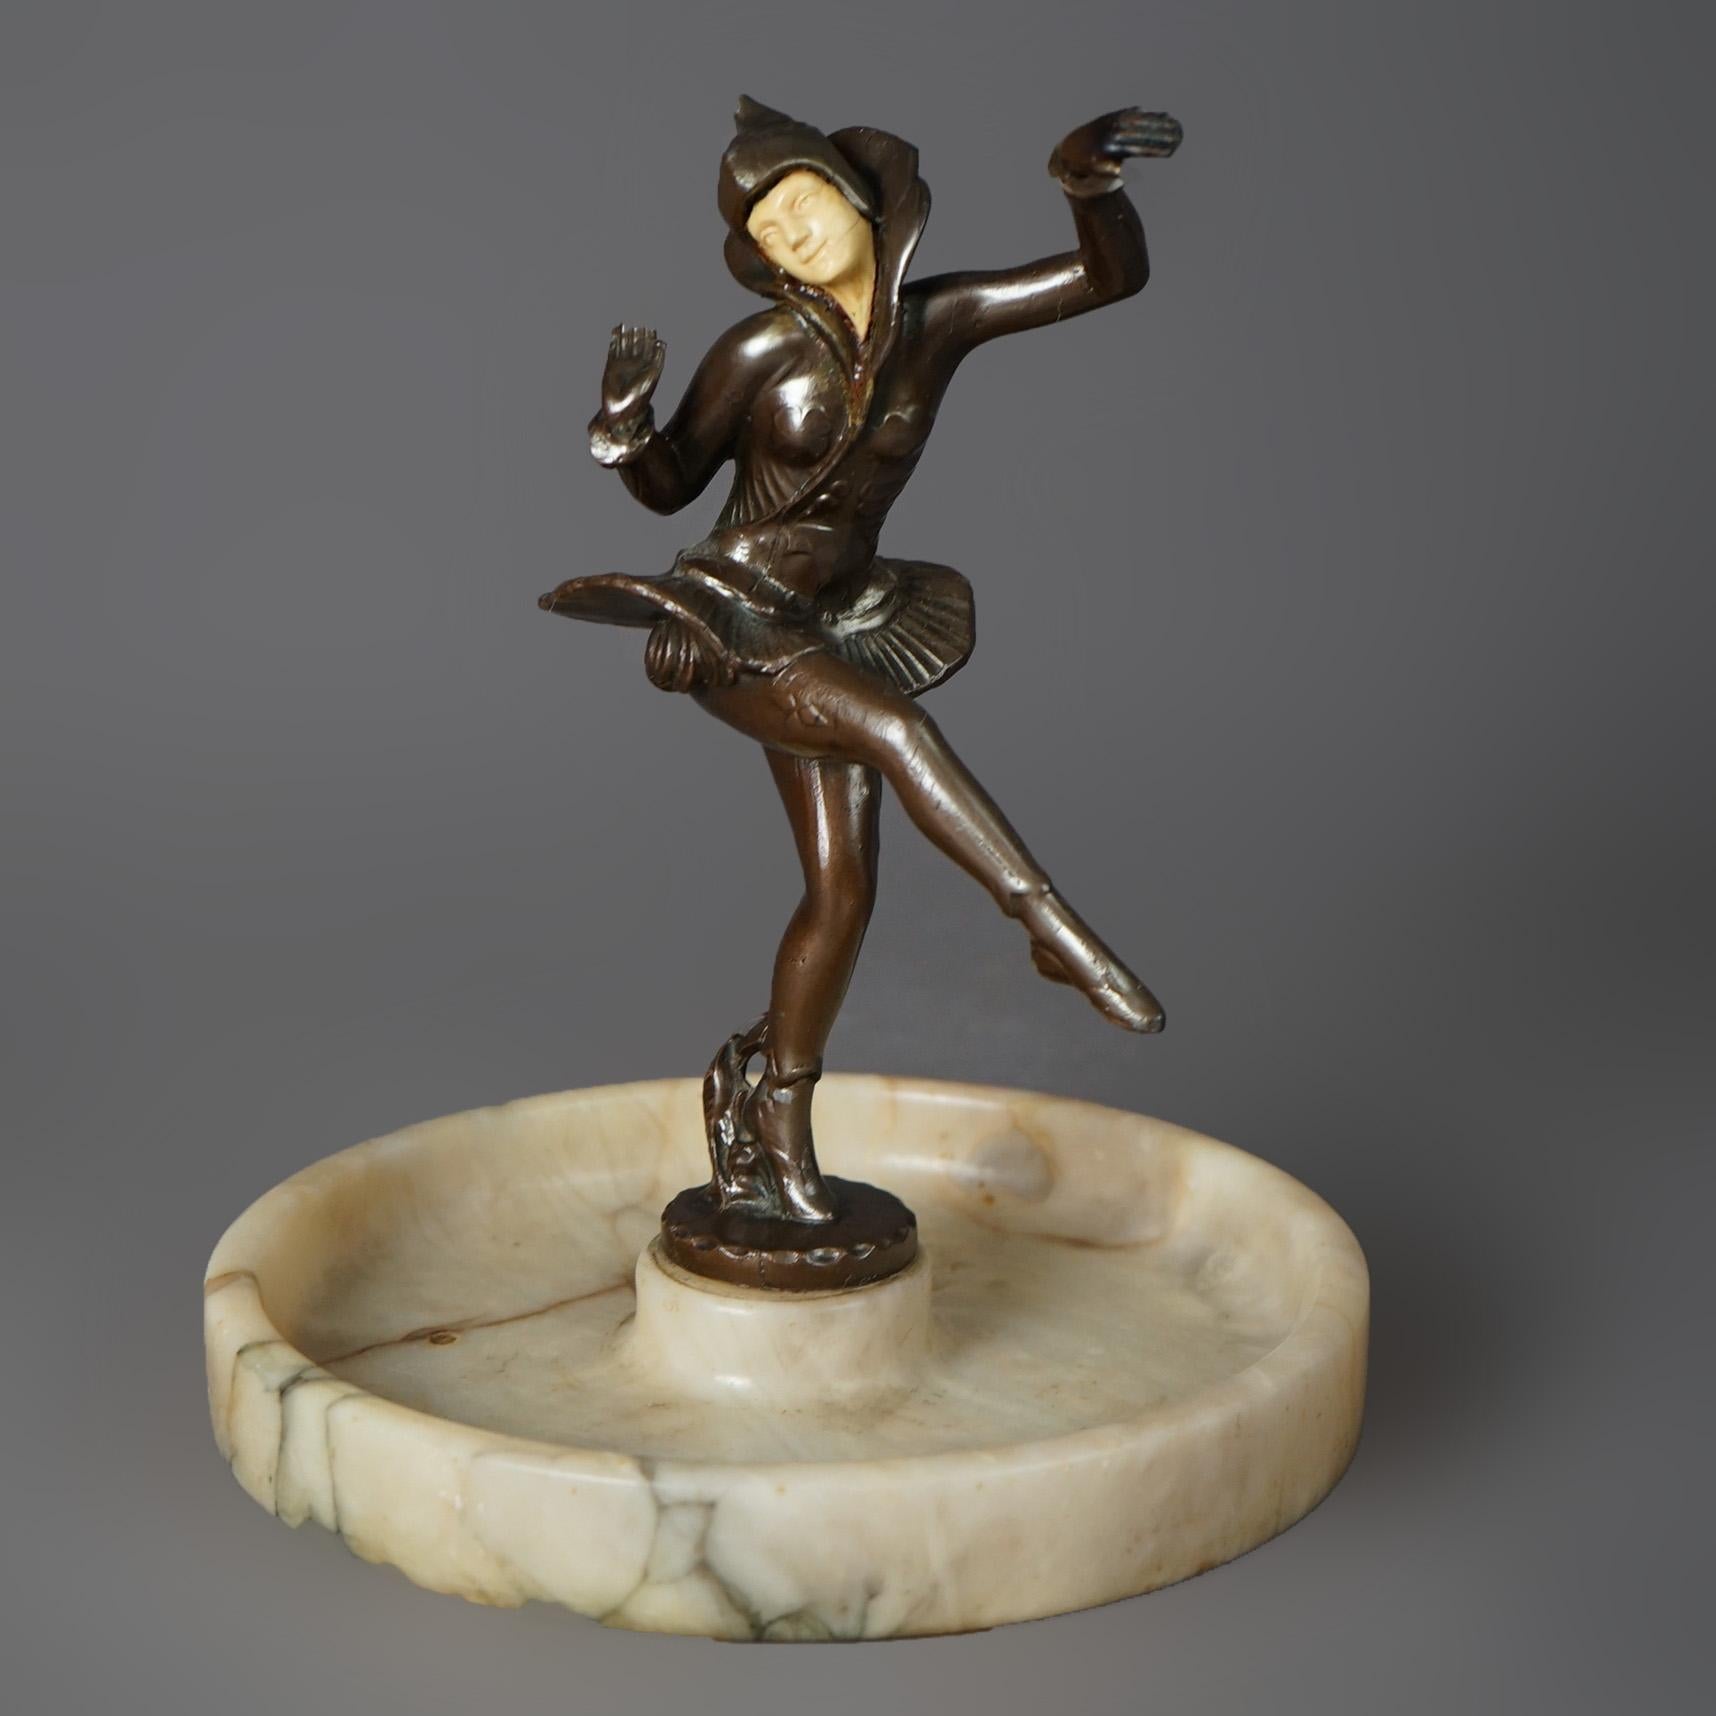 An antique Art Deco figural centerpiece offers figural cast metal sculpture of a dancing female harlequin with celluloid face over alabaster tray, c1930

Measures - 9